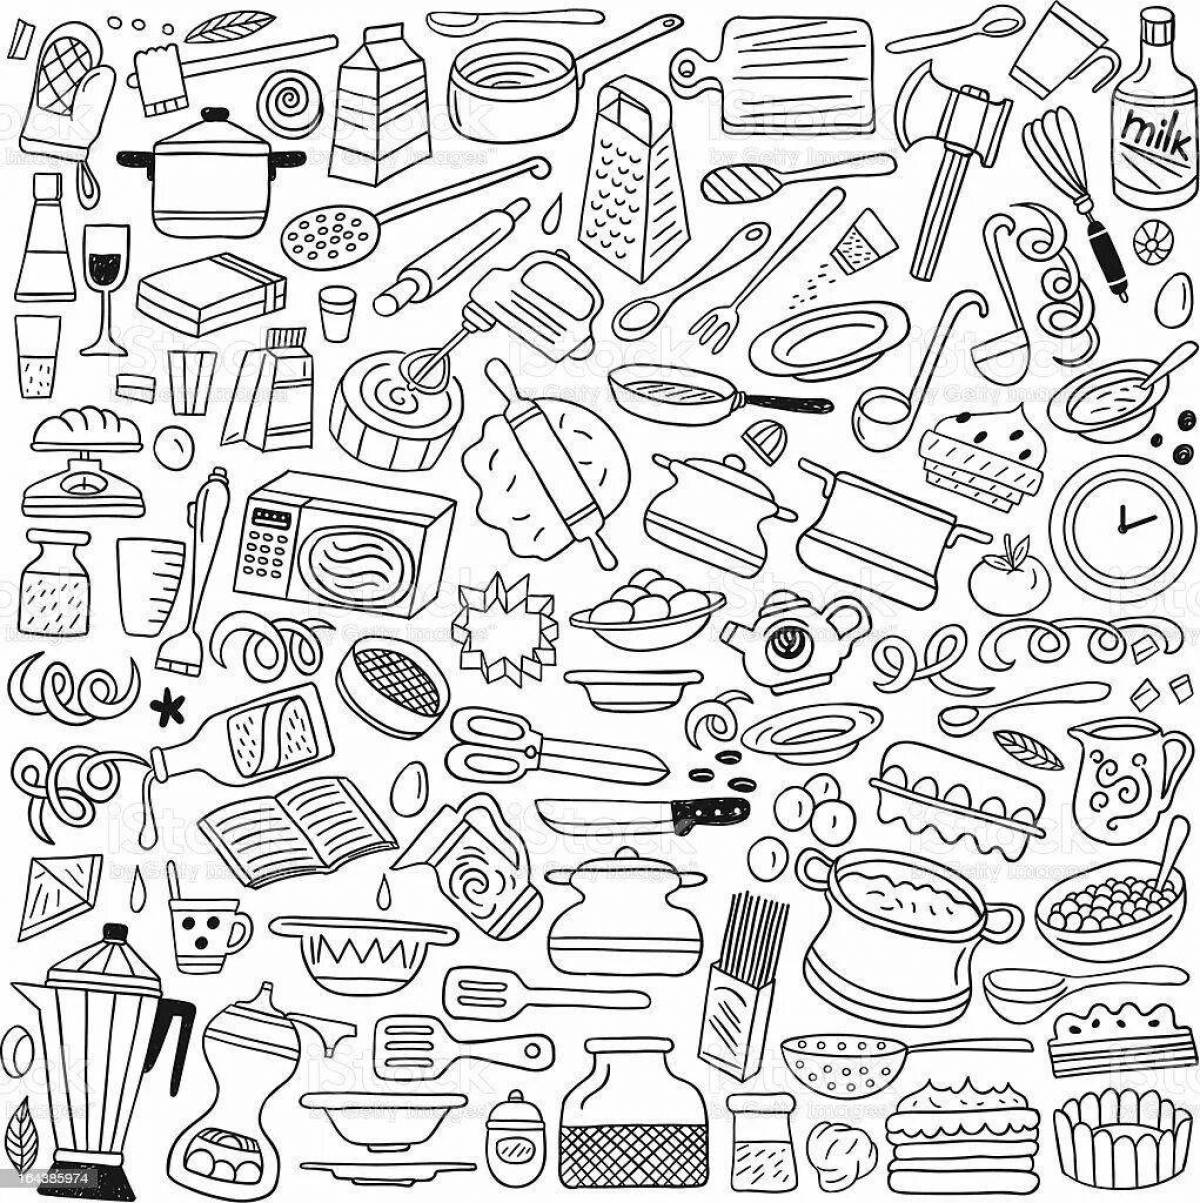 Refreshing meals and food coloring page